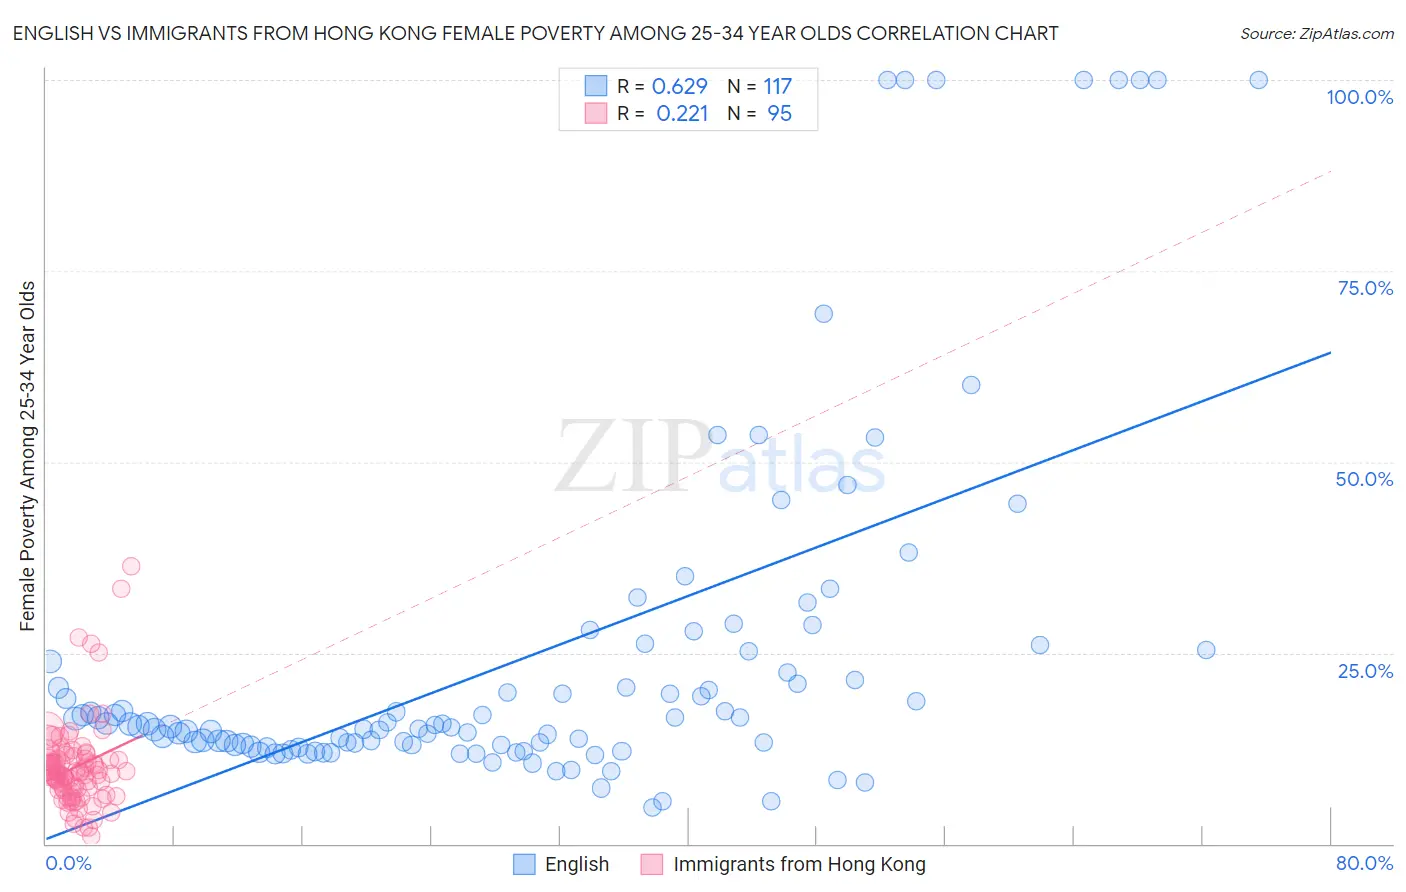 English vs Immigrants from Hong Kong Female Poverty Among 25-34 Year Olds